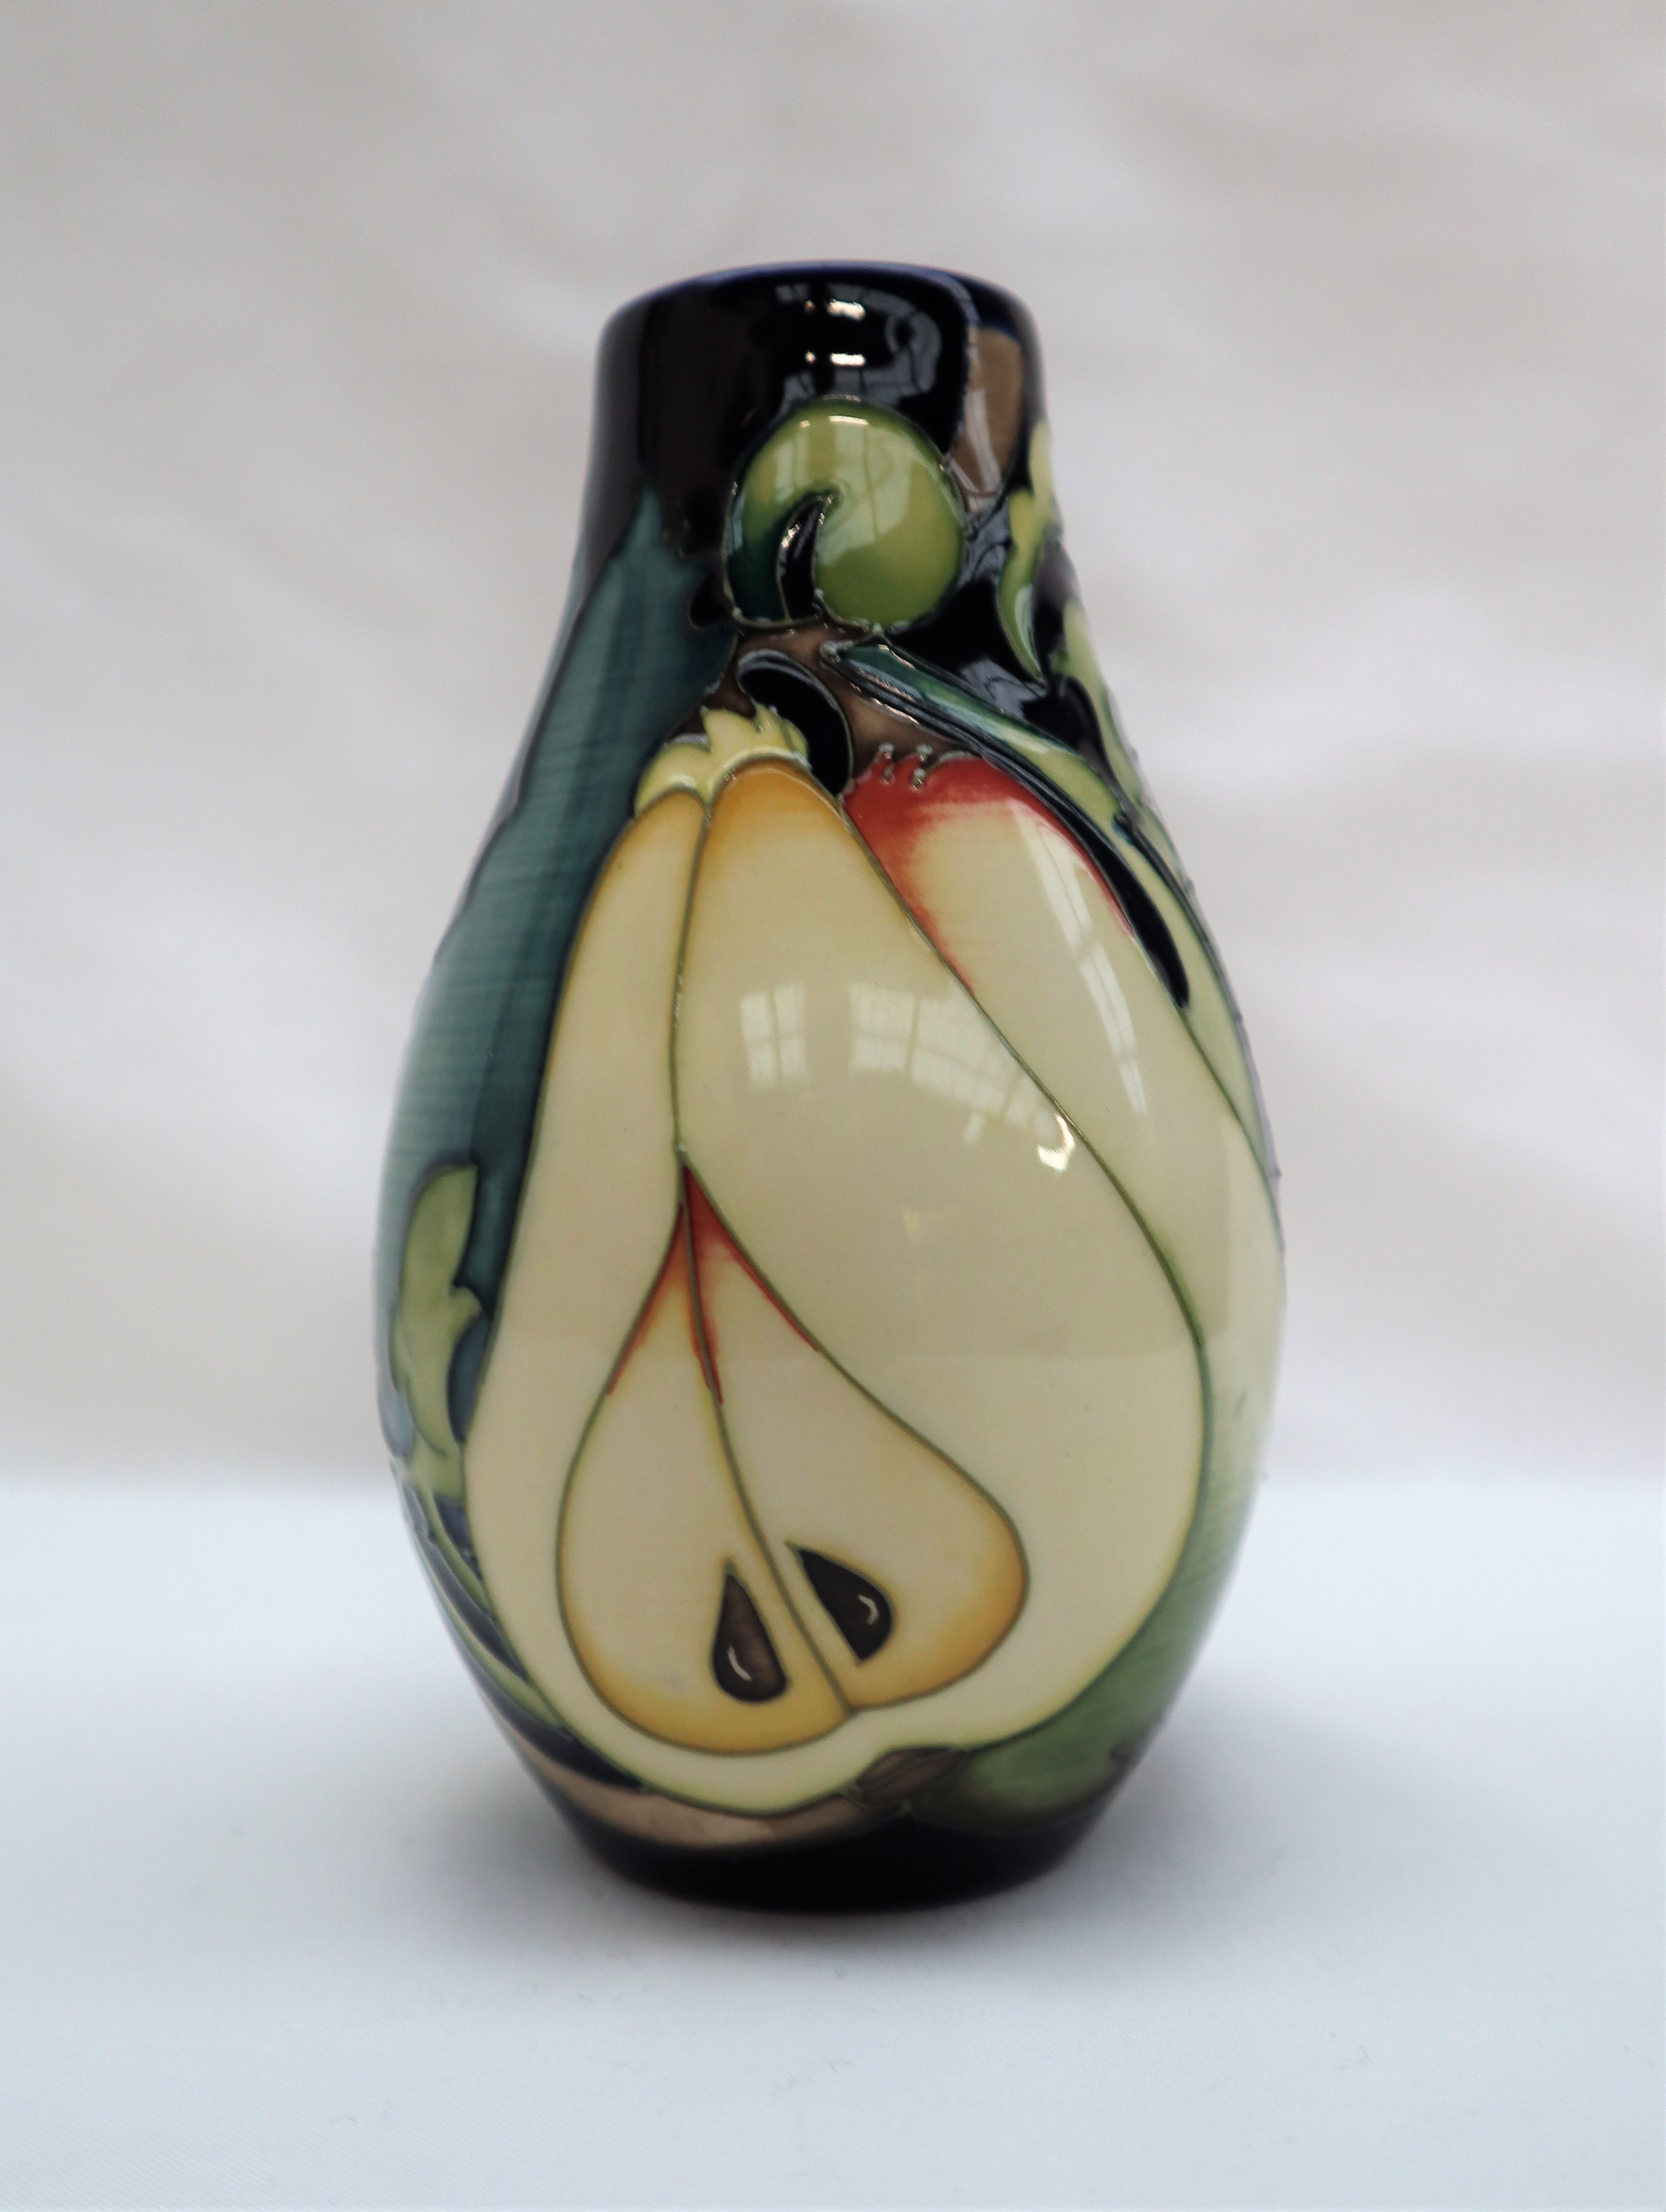 A limited edition Moorcroft pottery vase decorated with pears and flowers, dated 2010, - Image 2 of 5